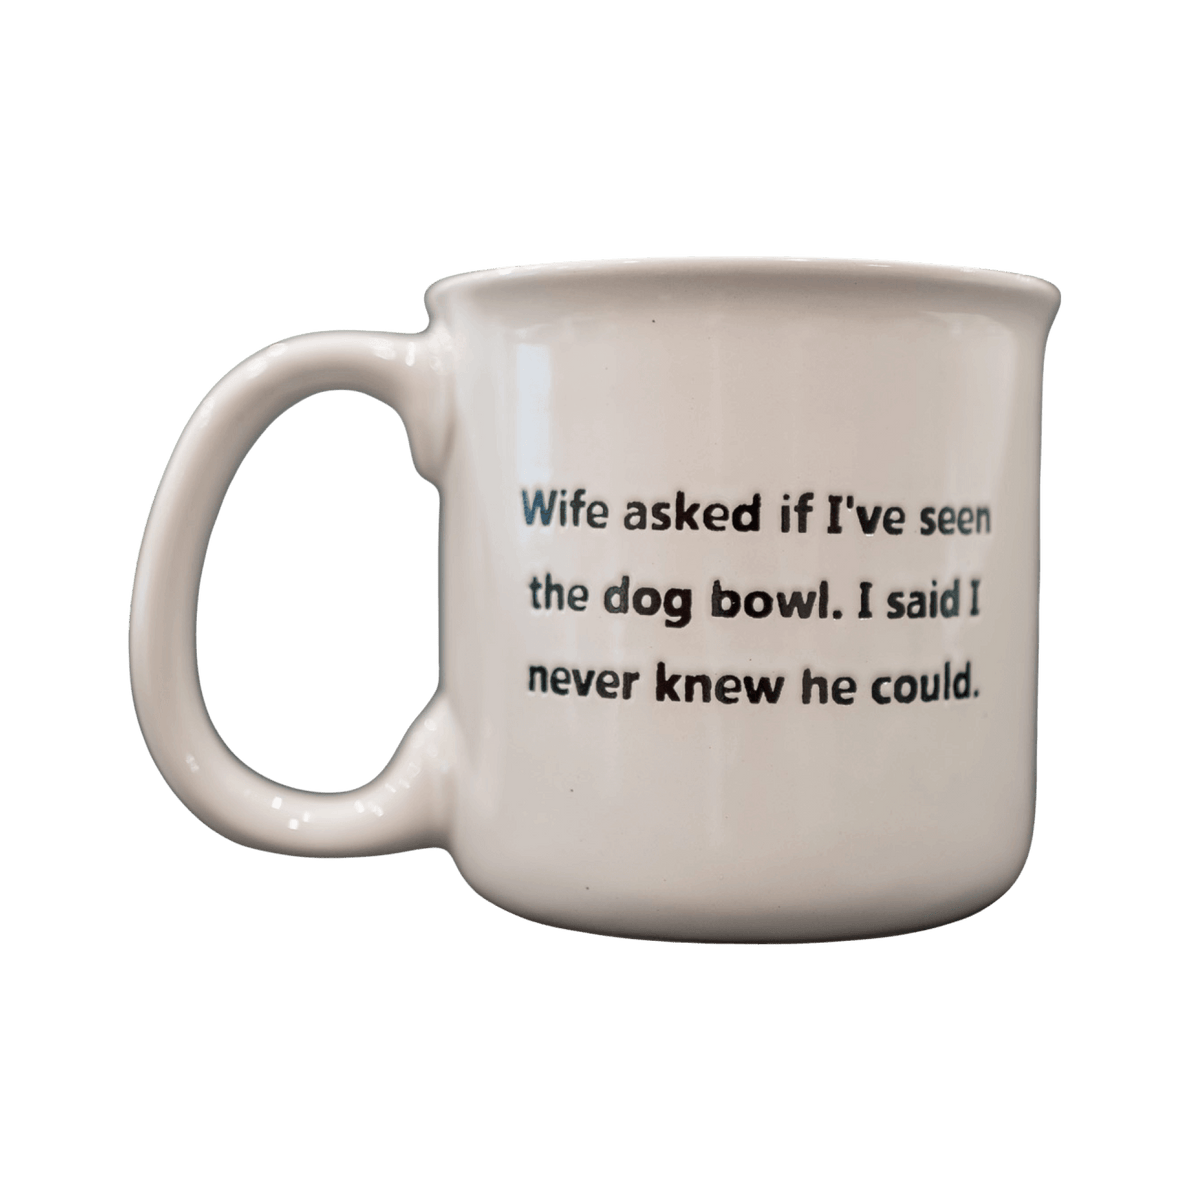 Wife asked if I've seen the dog bowl. I said I never knew he could